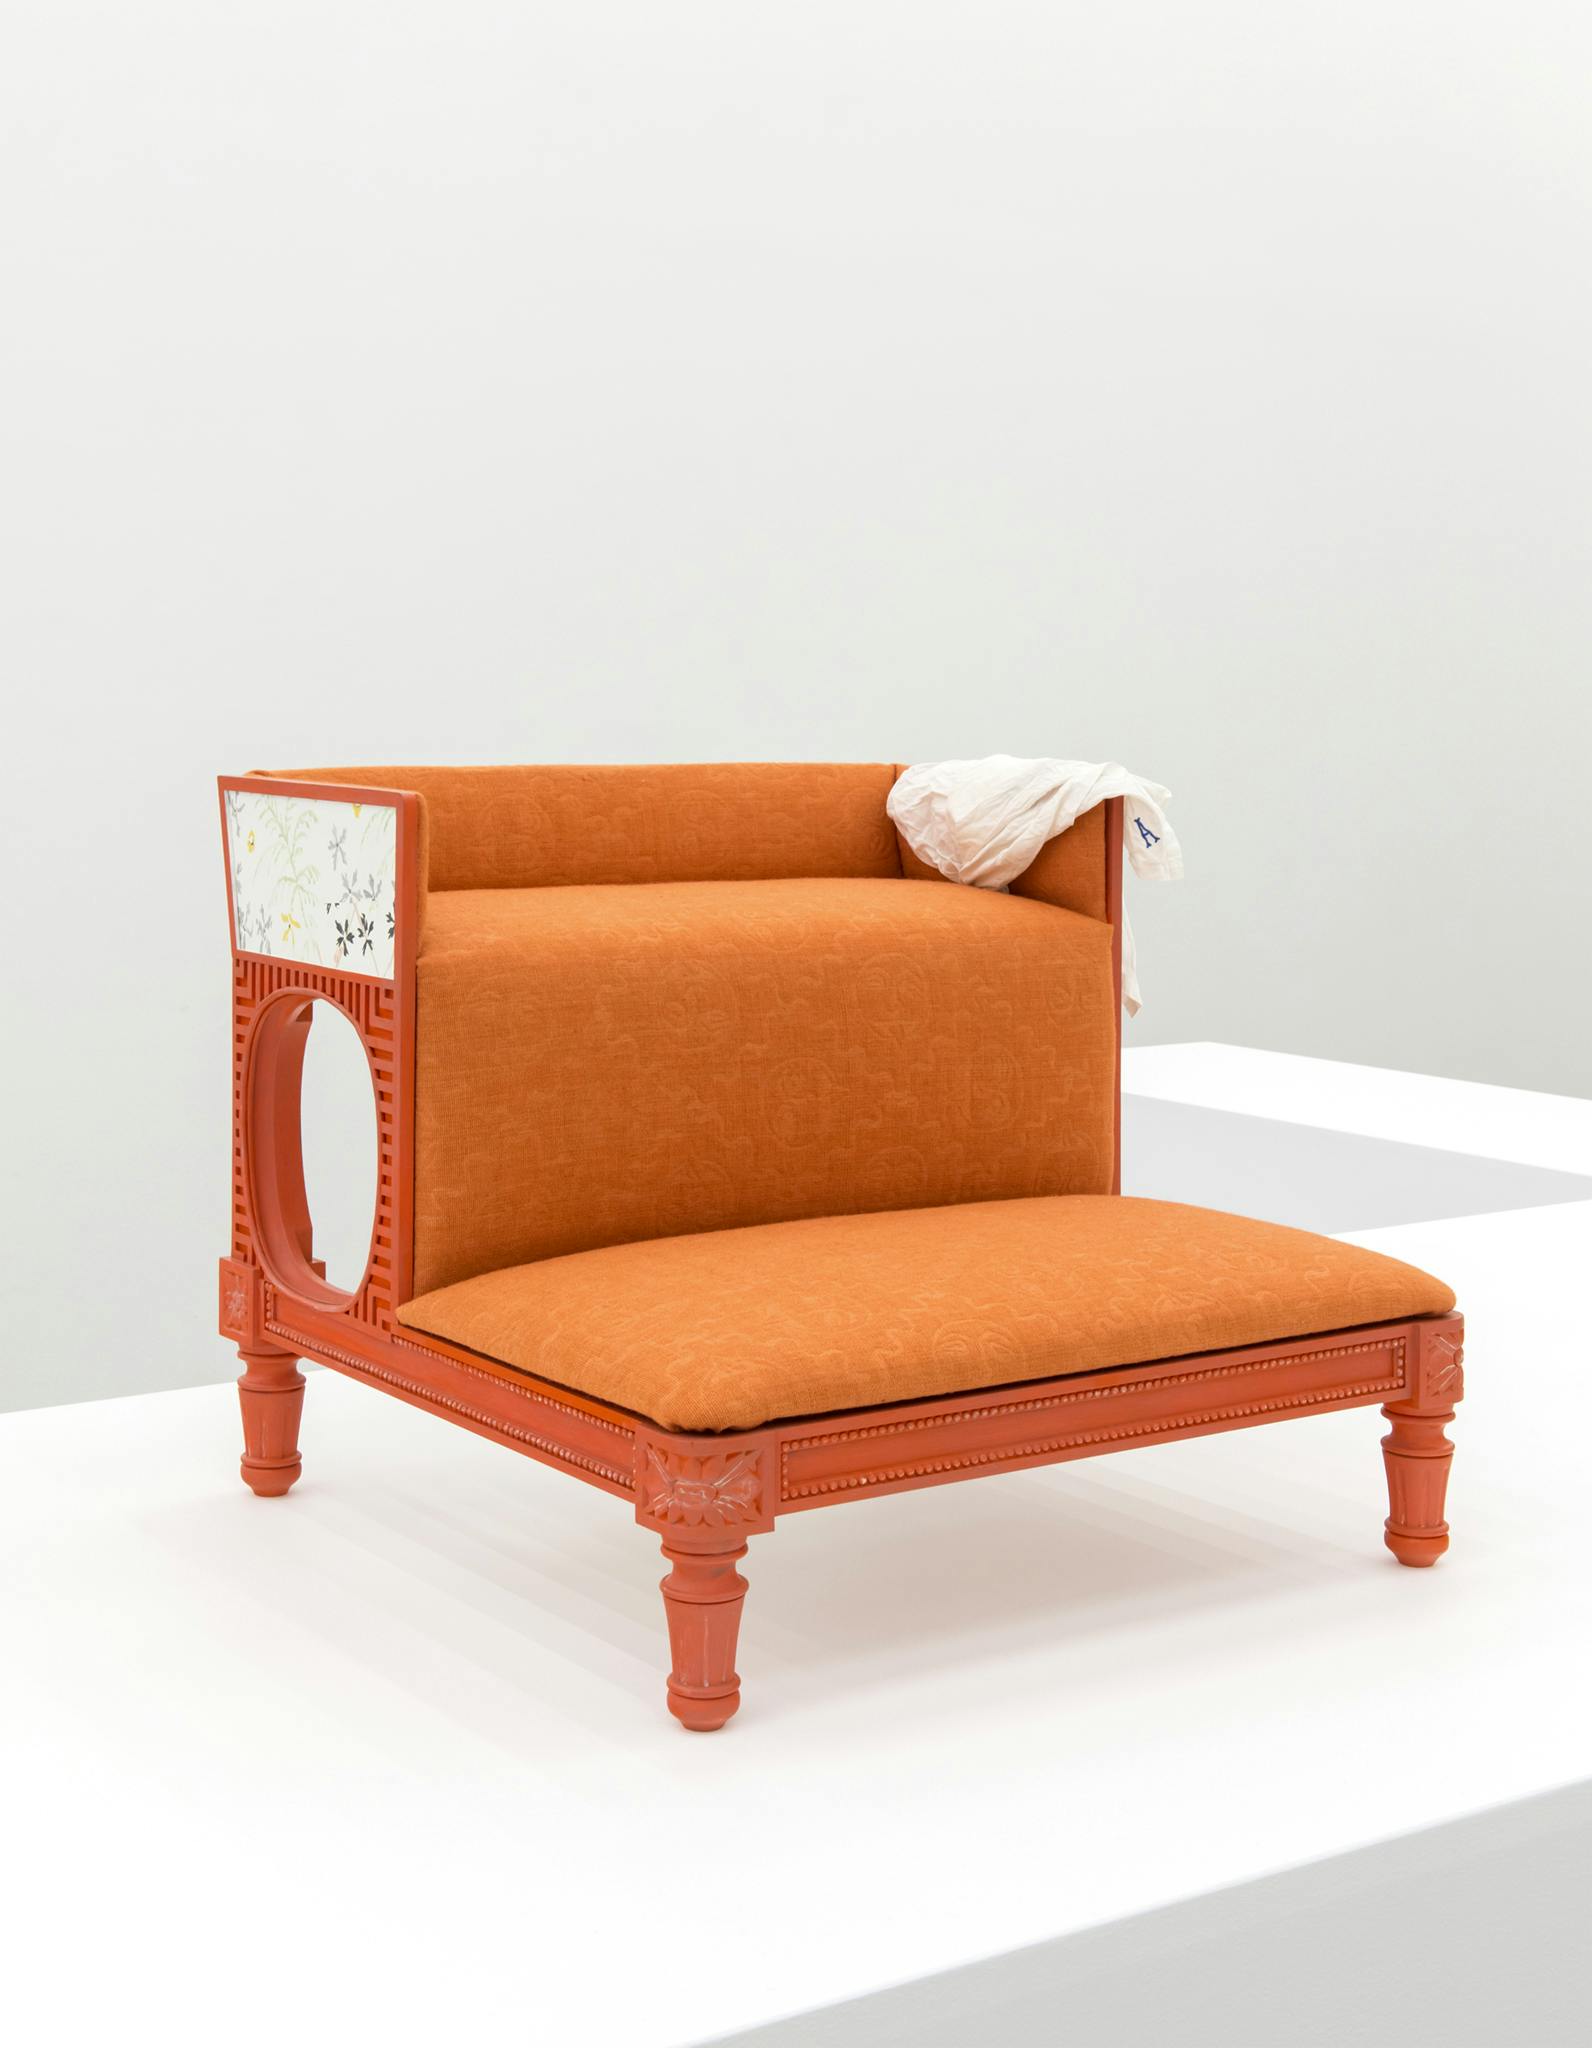 An orange bedstep sits on a plinth. Edged in wooden pearl beading, the tread of the steps is upholstered in a hand-dyed and woven, embossed orange fabric.